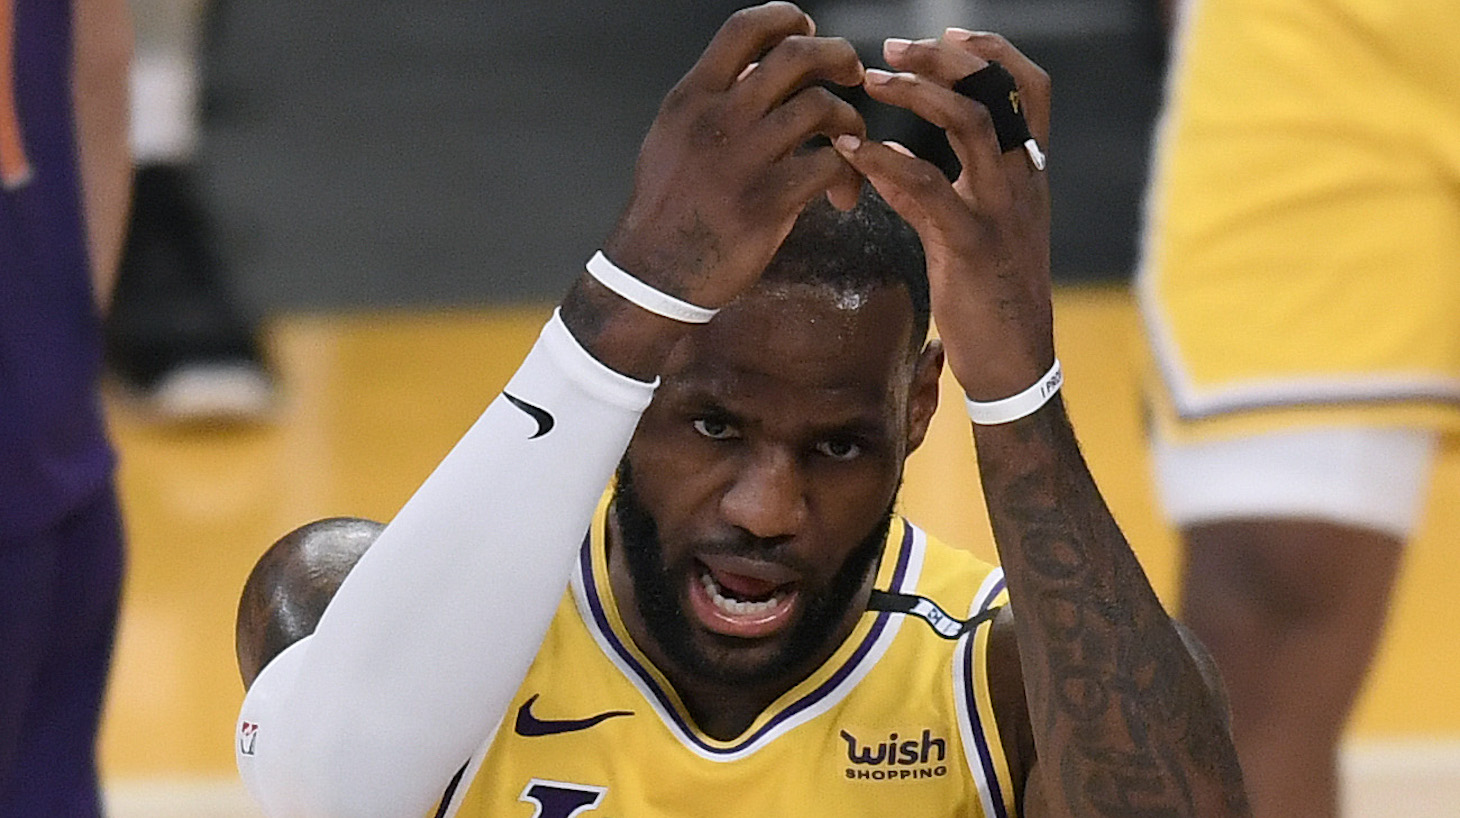 LOS ANGELES, CALIFORNIA - JUNE 03: LeBron James #23 of the Los Angeles Lakers reacts after a Phoenix Suns foul in the second quarter during game six of the Western Conference first round series at Staples Center on June 03, 2021 in Los Angeles, California. (Photo by Harry How/Getty Images) NOTE TO USER: User expressly acknowledges and agrees that, by downloading and or using this photograph, User is consenting to the terms and conditions of the Getty Images License Agreement.